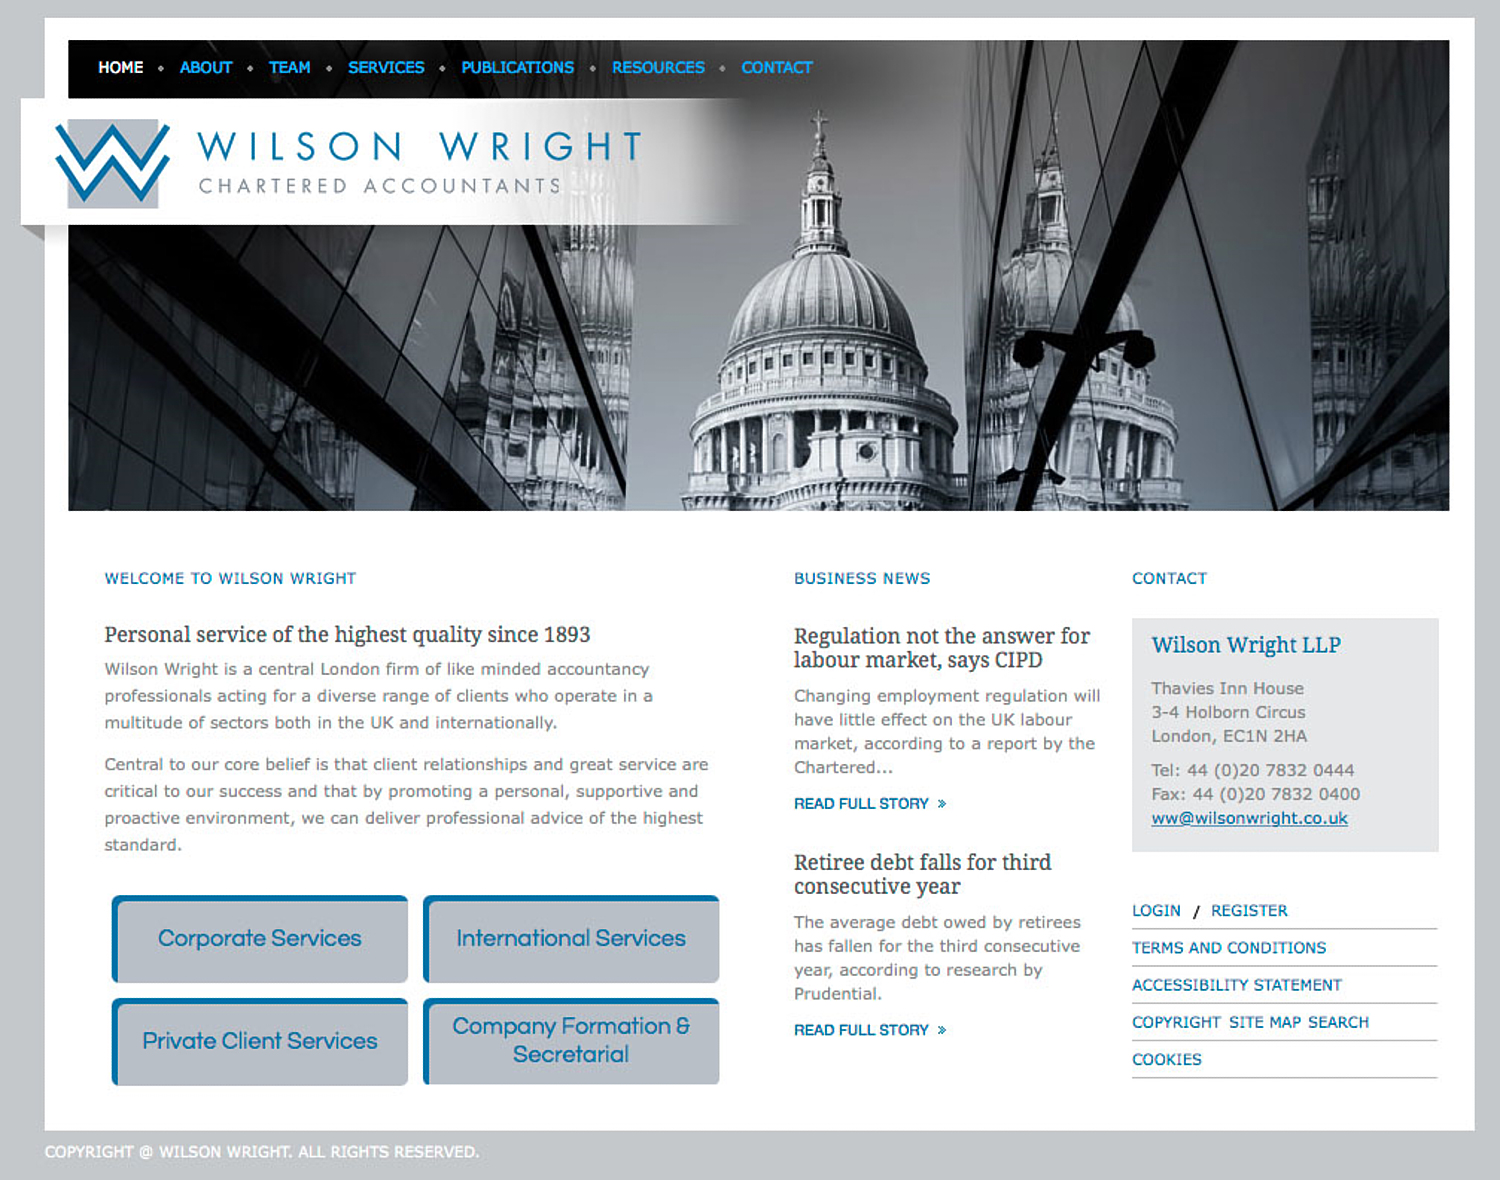 Website Banners for Wilson Wright